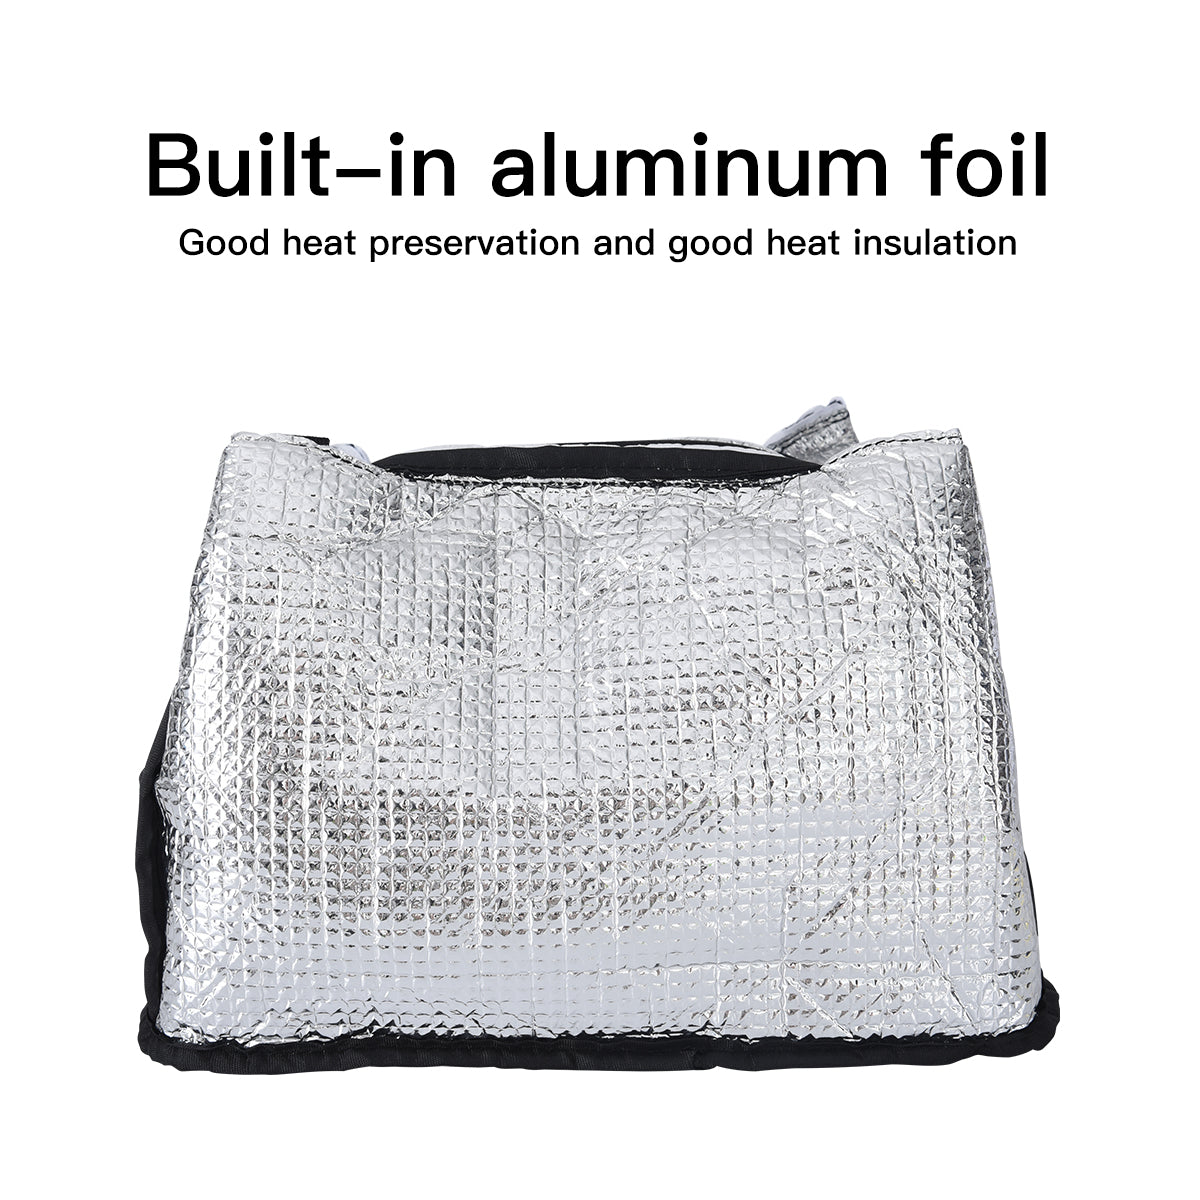 This insulated bag is lined with a layer of aluminium foil for good heat retention and insulation.